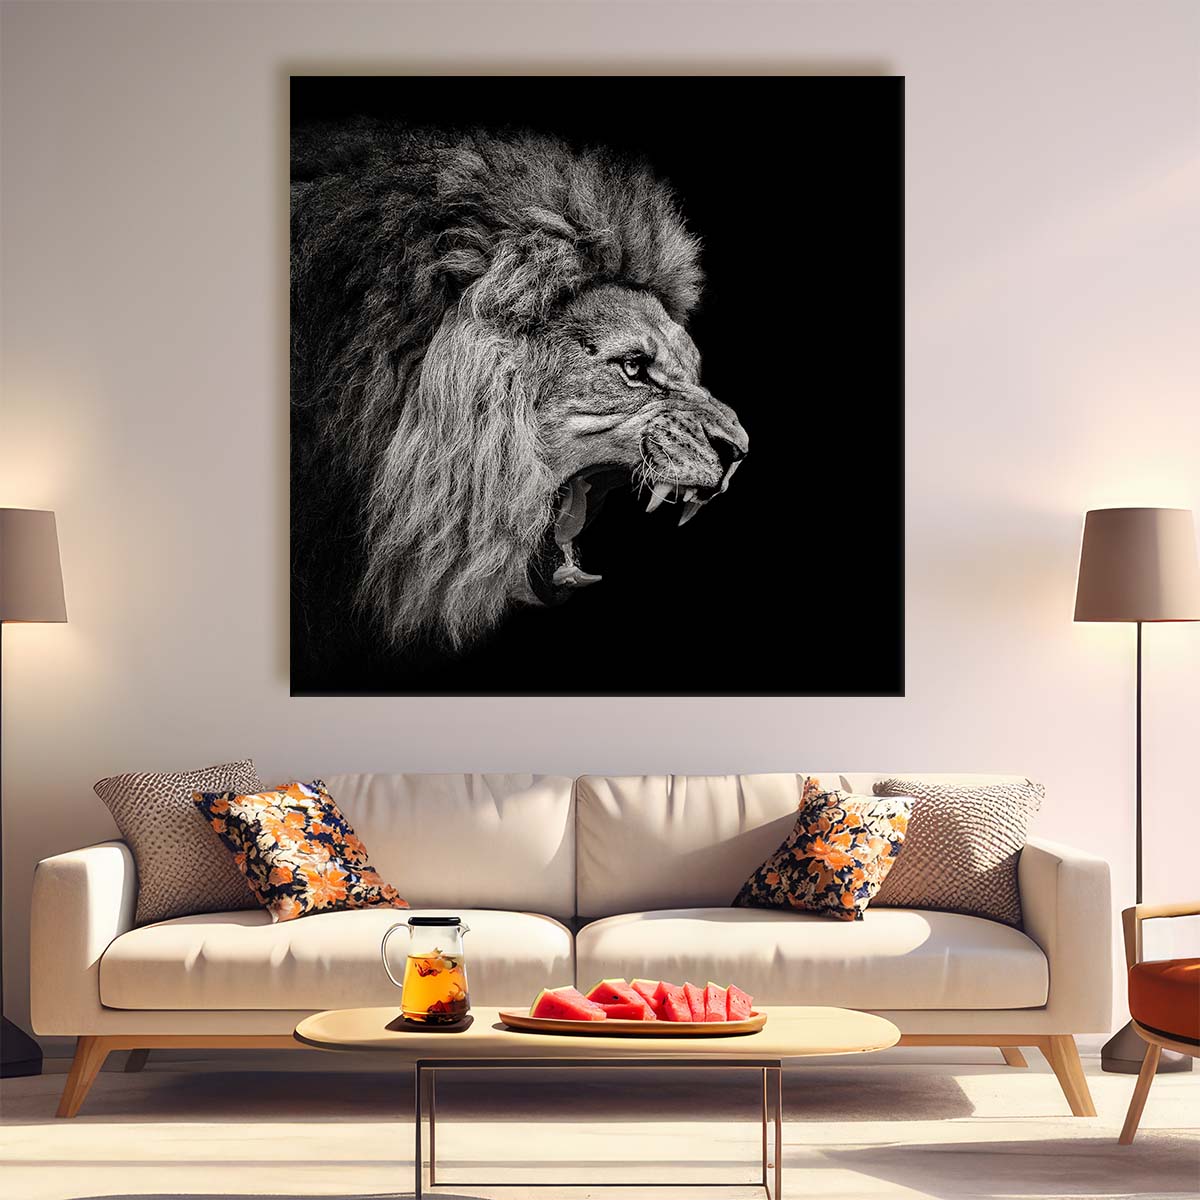 Dark Monochrome Roaring Lion The Angry Predator Wall Art by Luxuriance Designs. Made in USA.